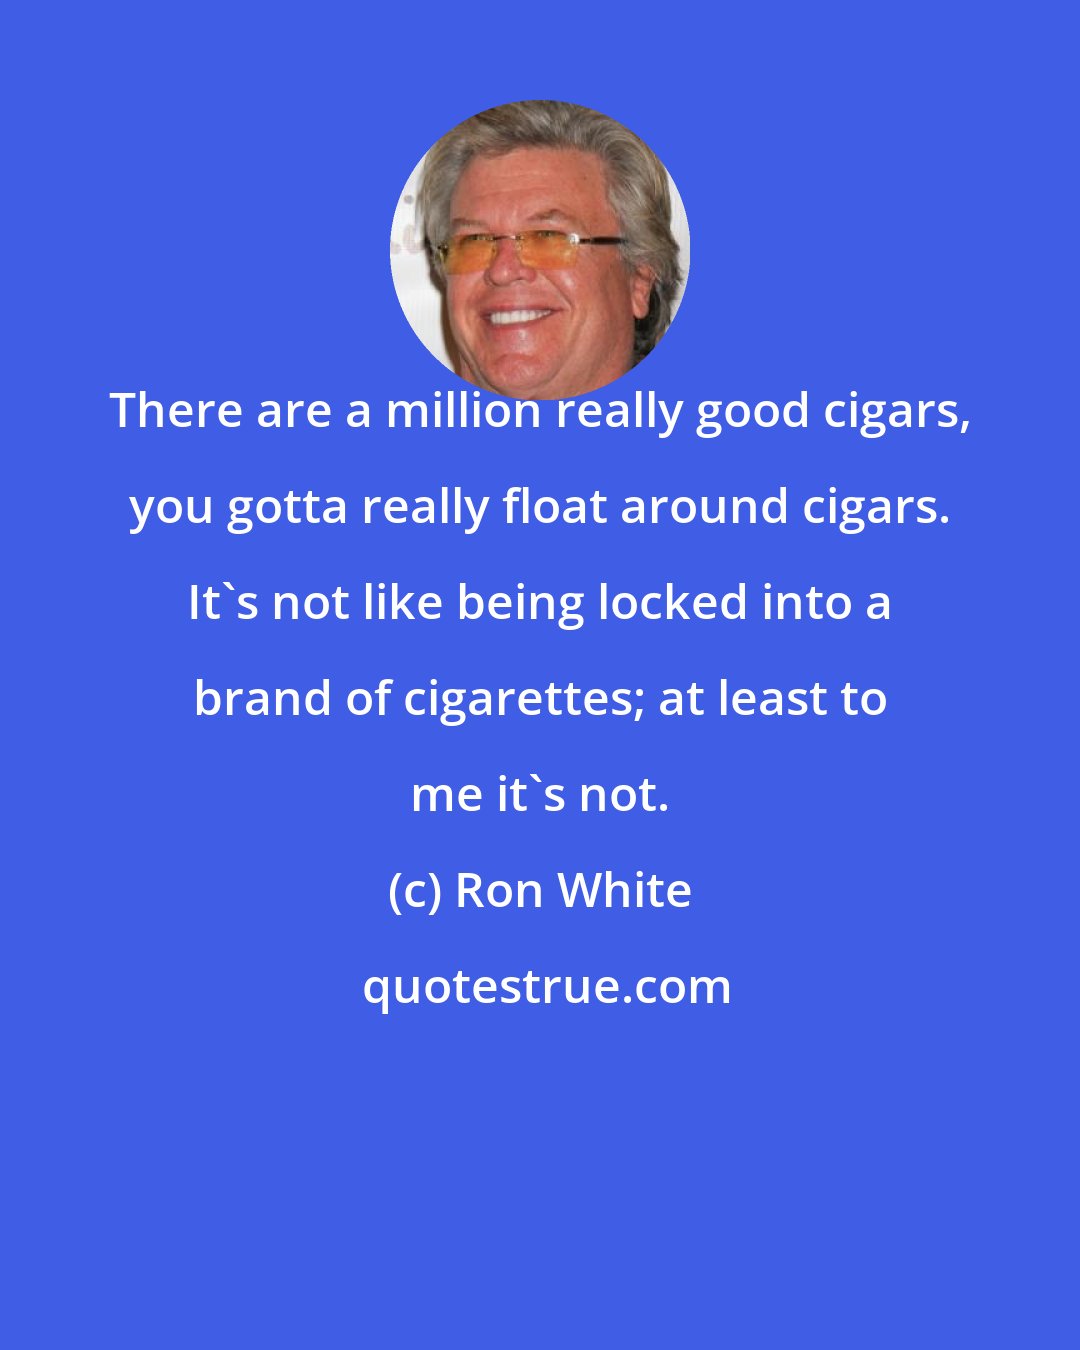 Ron White: There are a million really good cigars, you gotta really float around cigars. It's not like being locked into a brand of cigarettes; at least to me it's not.